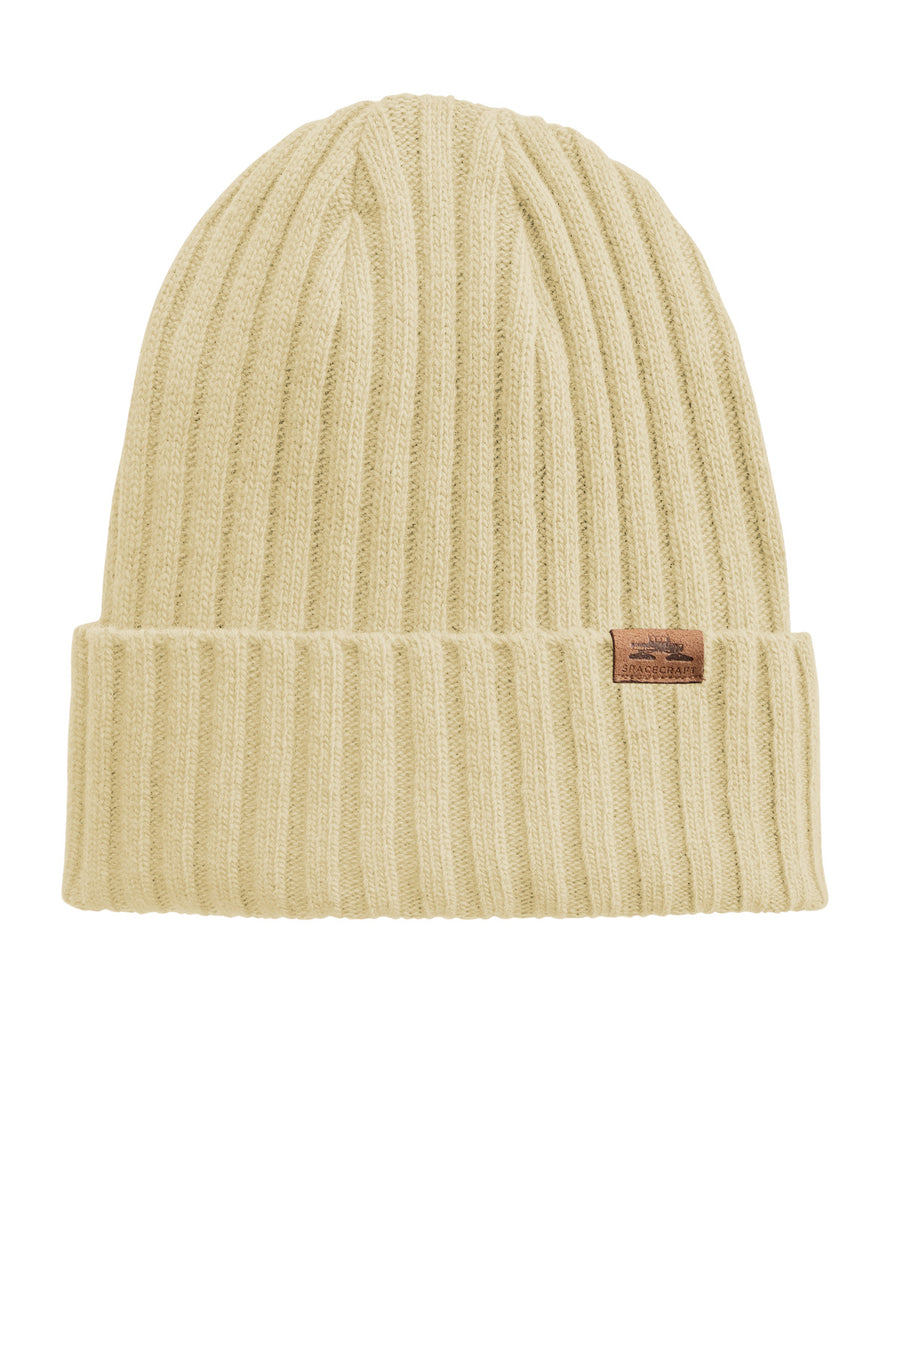 LIMITED EDITION Spacecraft Square Knot Beanie